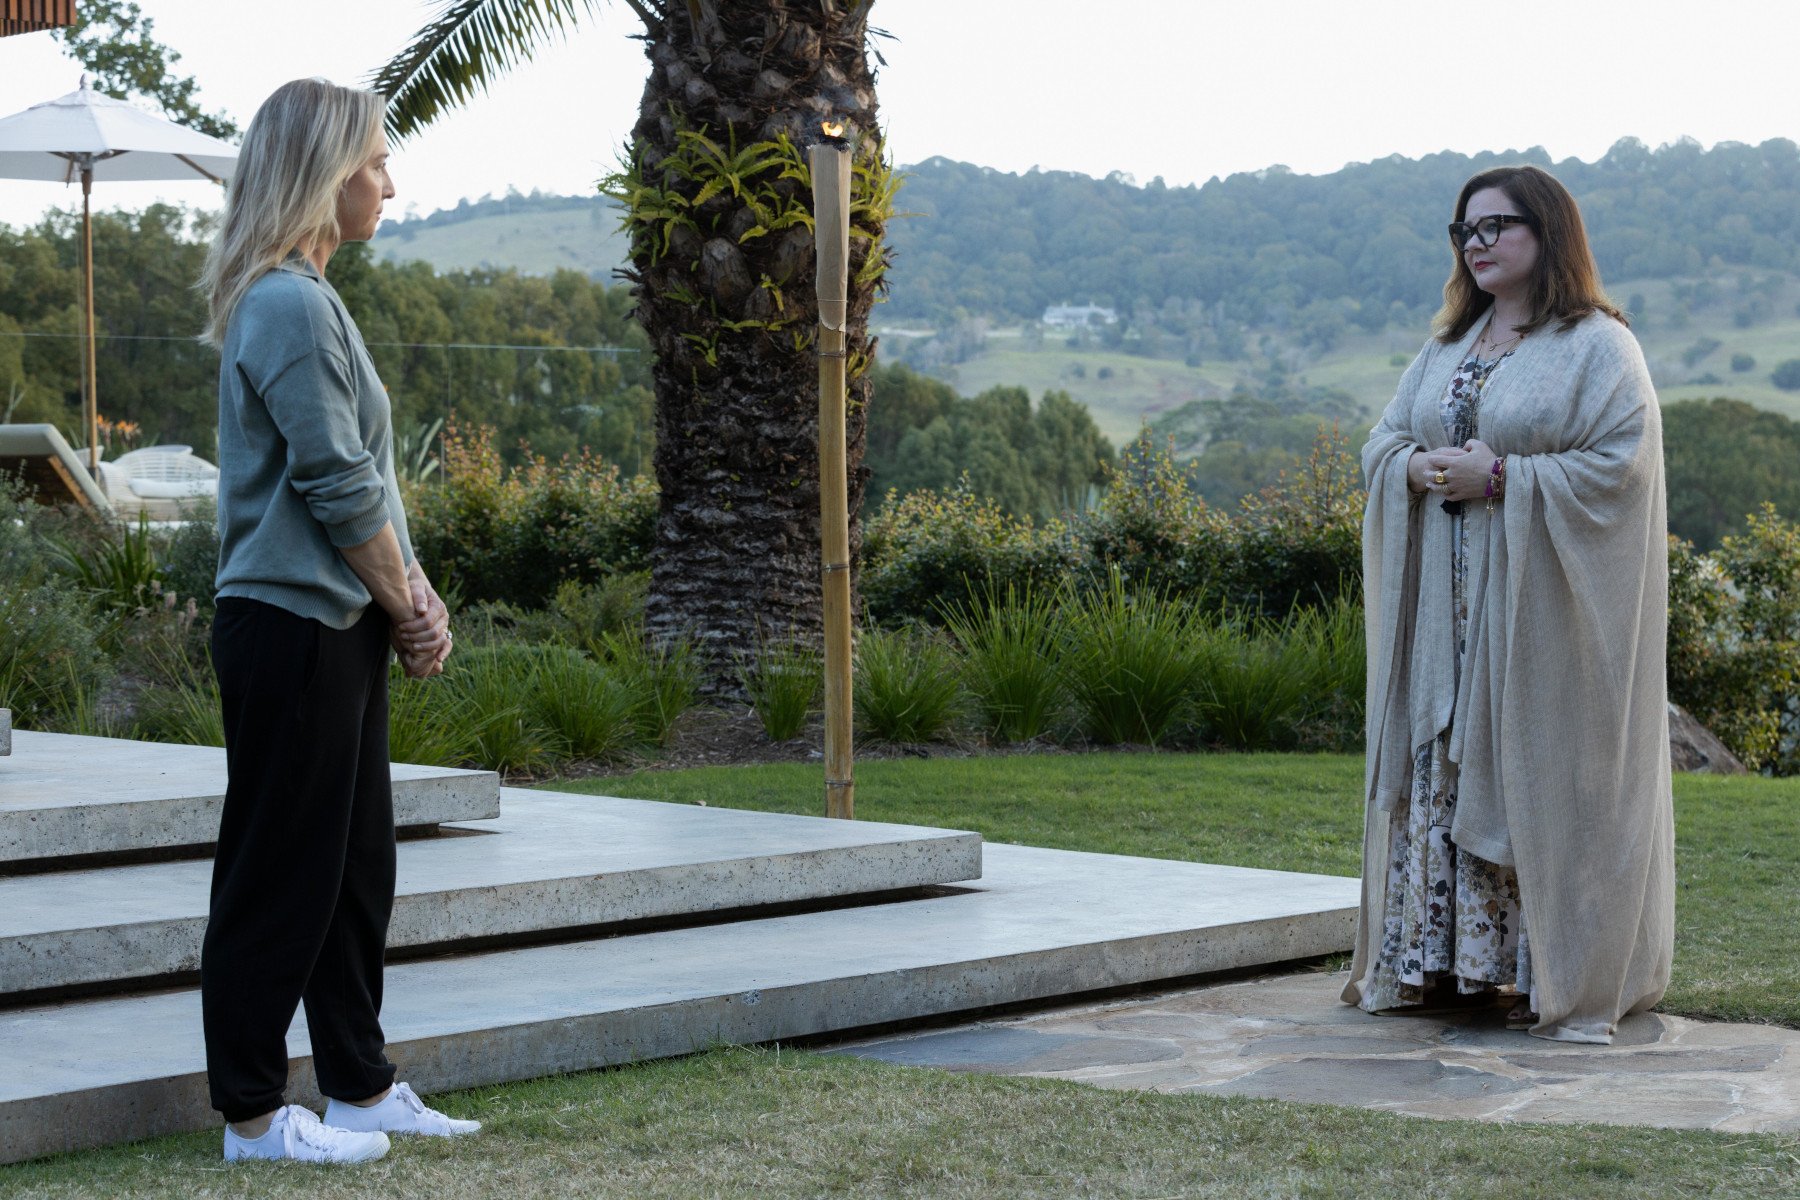 Heather (Asher Keddie) and Frances (Melissa McCarthy) standing across from one another in Hulu's 'Nine Perfect Strangers' Episode 1. The two have their hands clasped in front of each other and look uncomfortable. There are trees and greenery in the background.